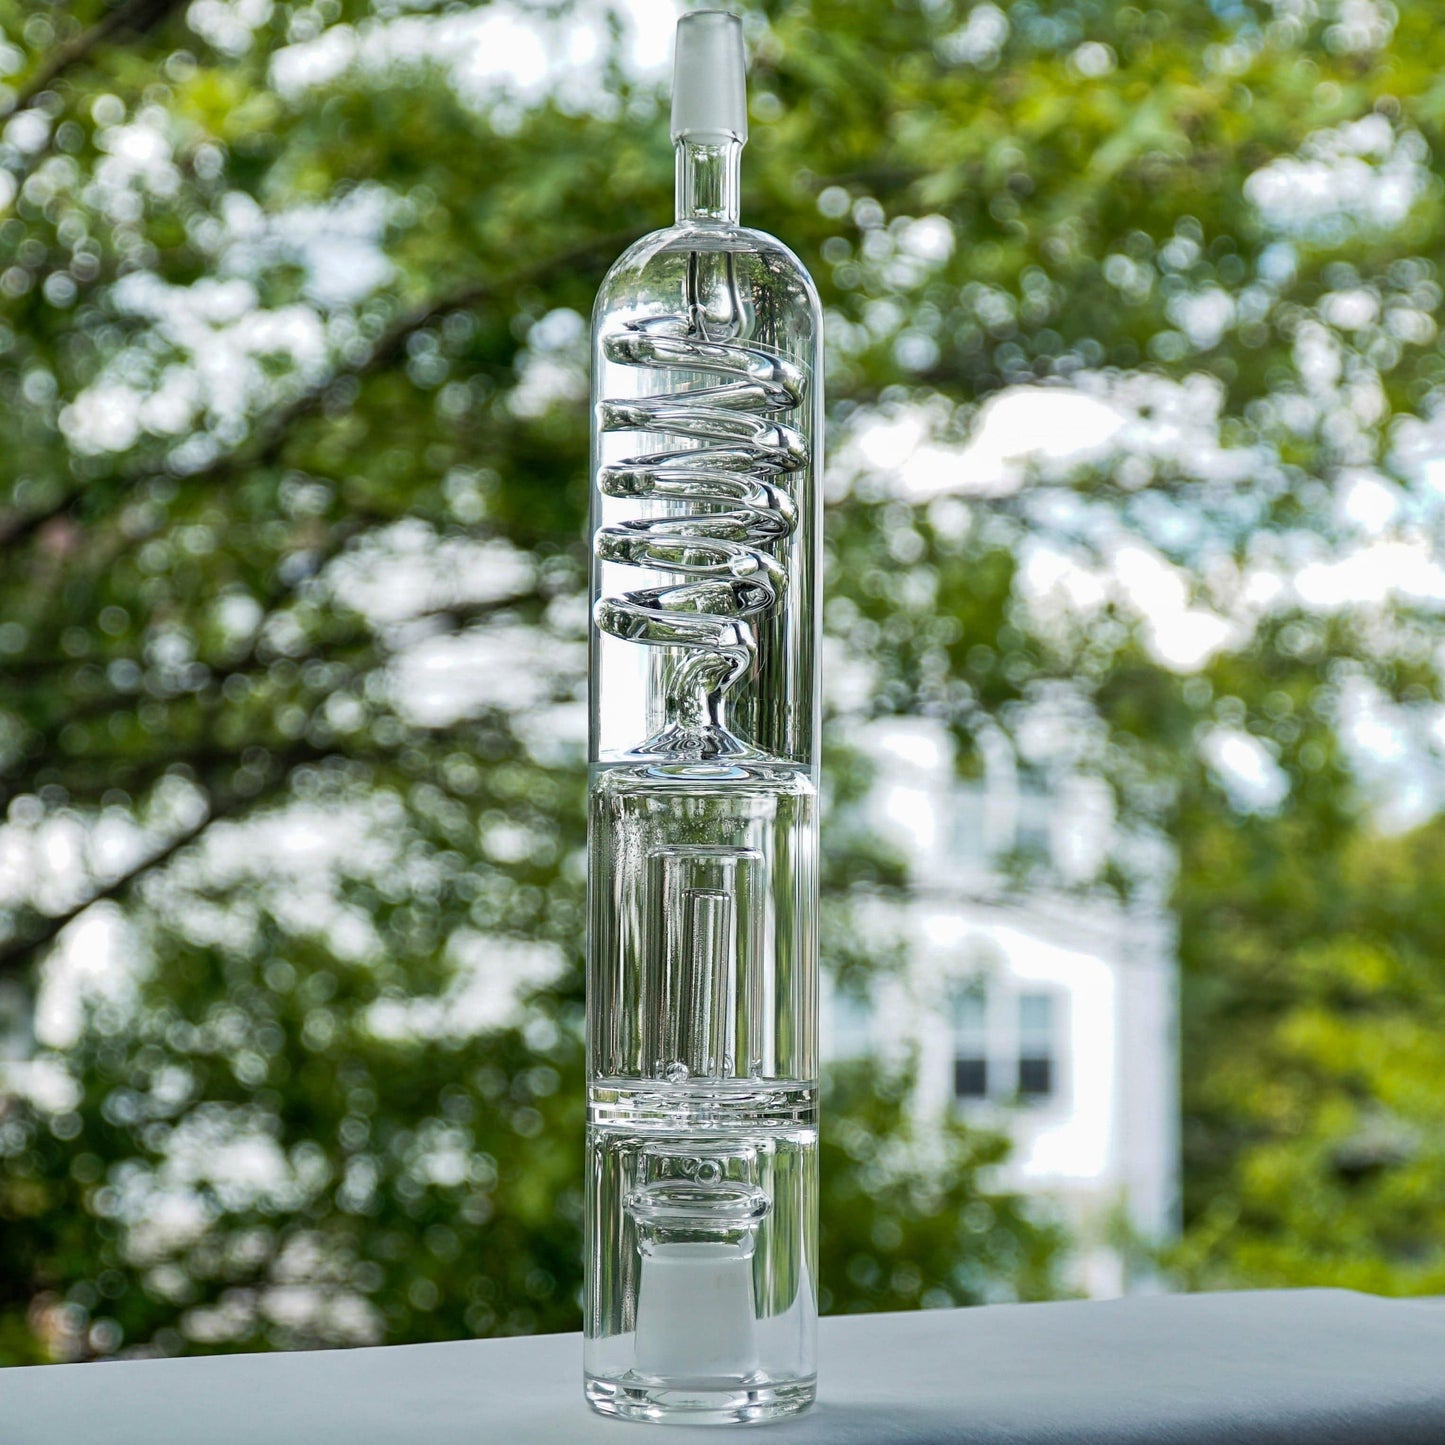 Freeze Coil + Bubbler The Glacier Tube - Freeze Coil and Water Bubbler for your Volcano